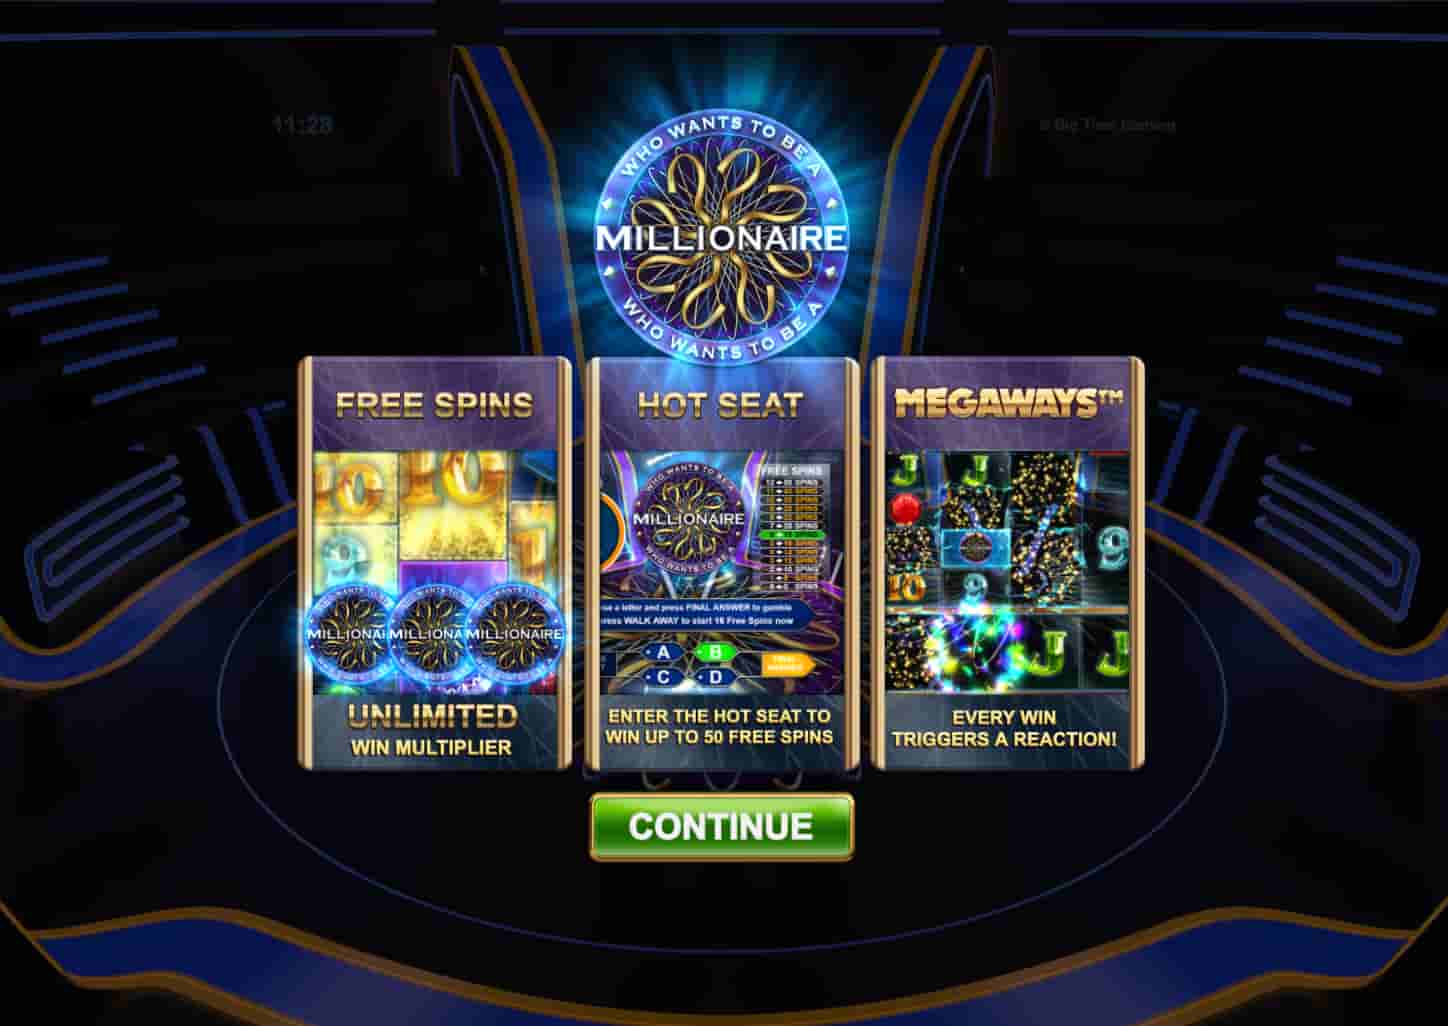 Who Wants to be a Millionaire Megaways screenshot 4